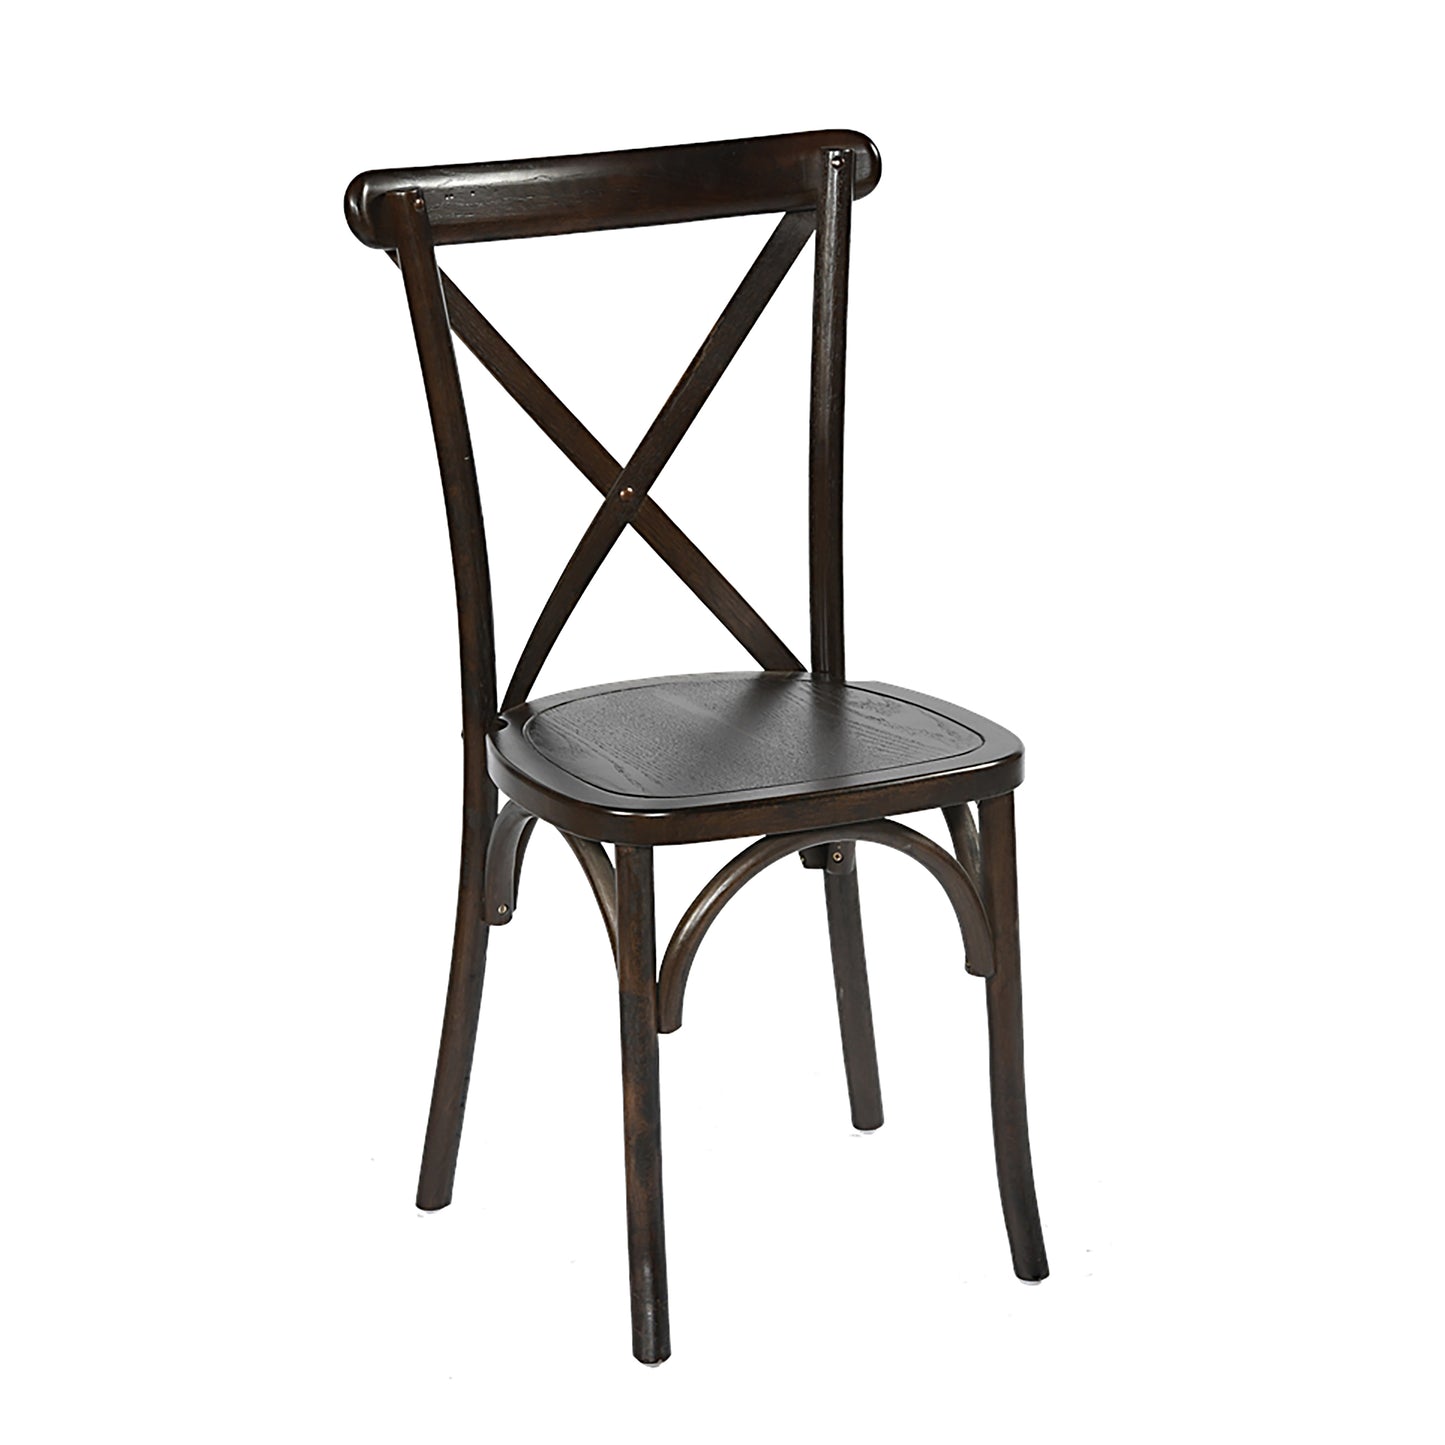 3. York Crossback Stacking Chair